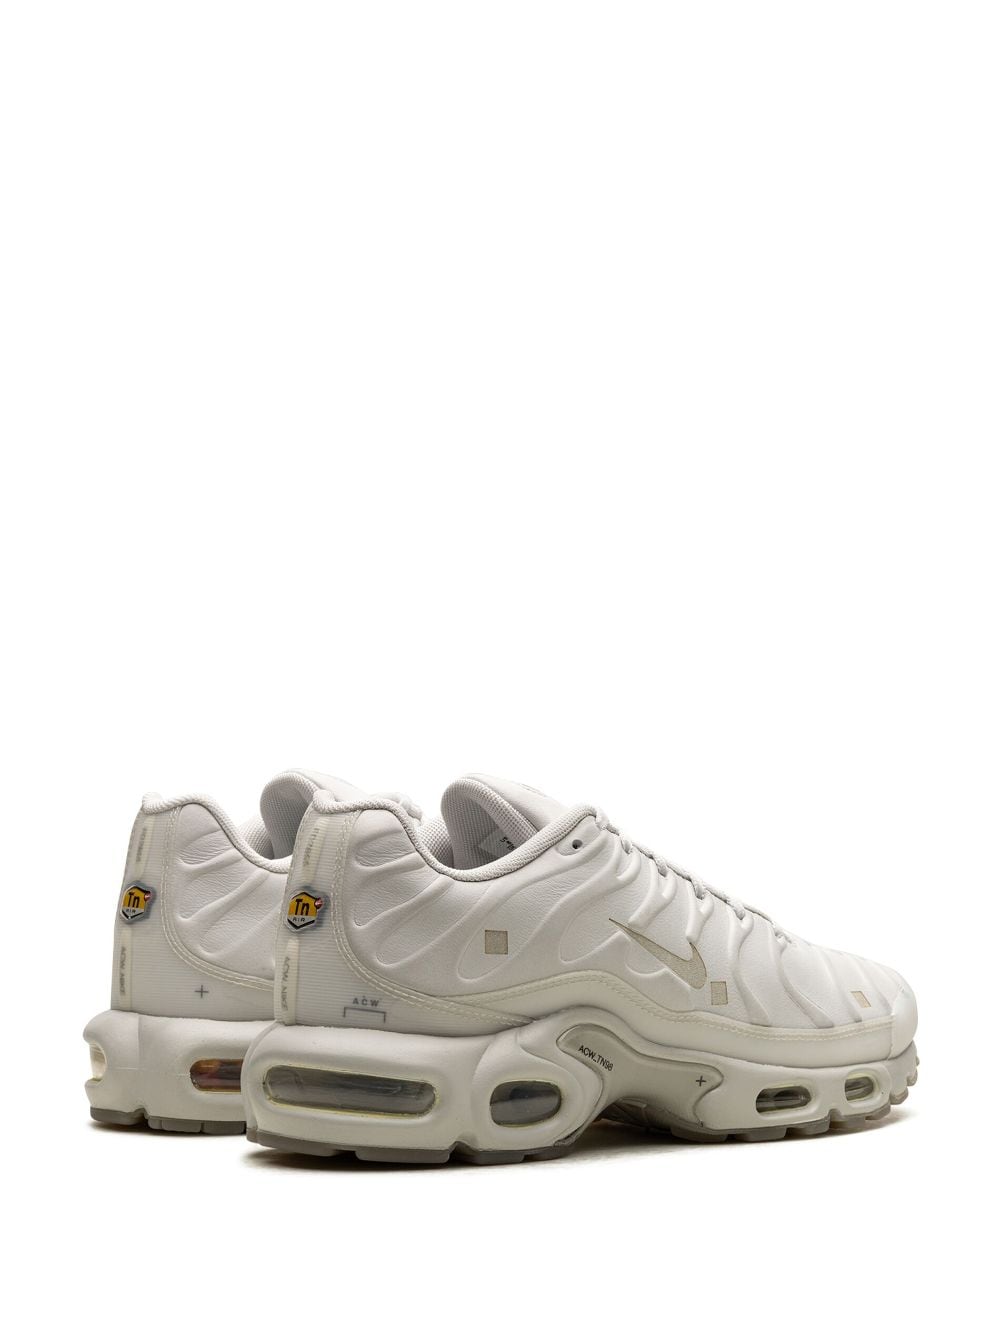 Nike x A-COLD-WALL* Air Max Plus sneakers White